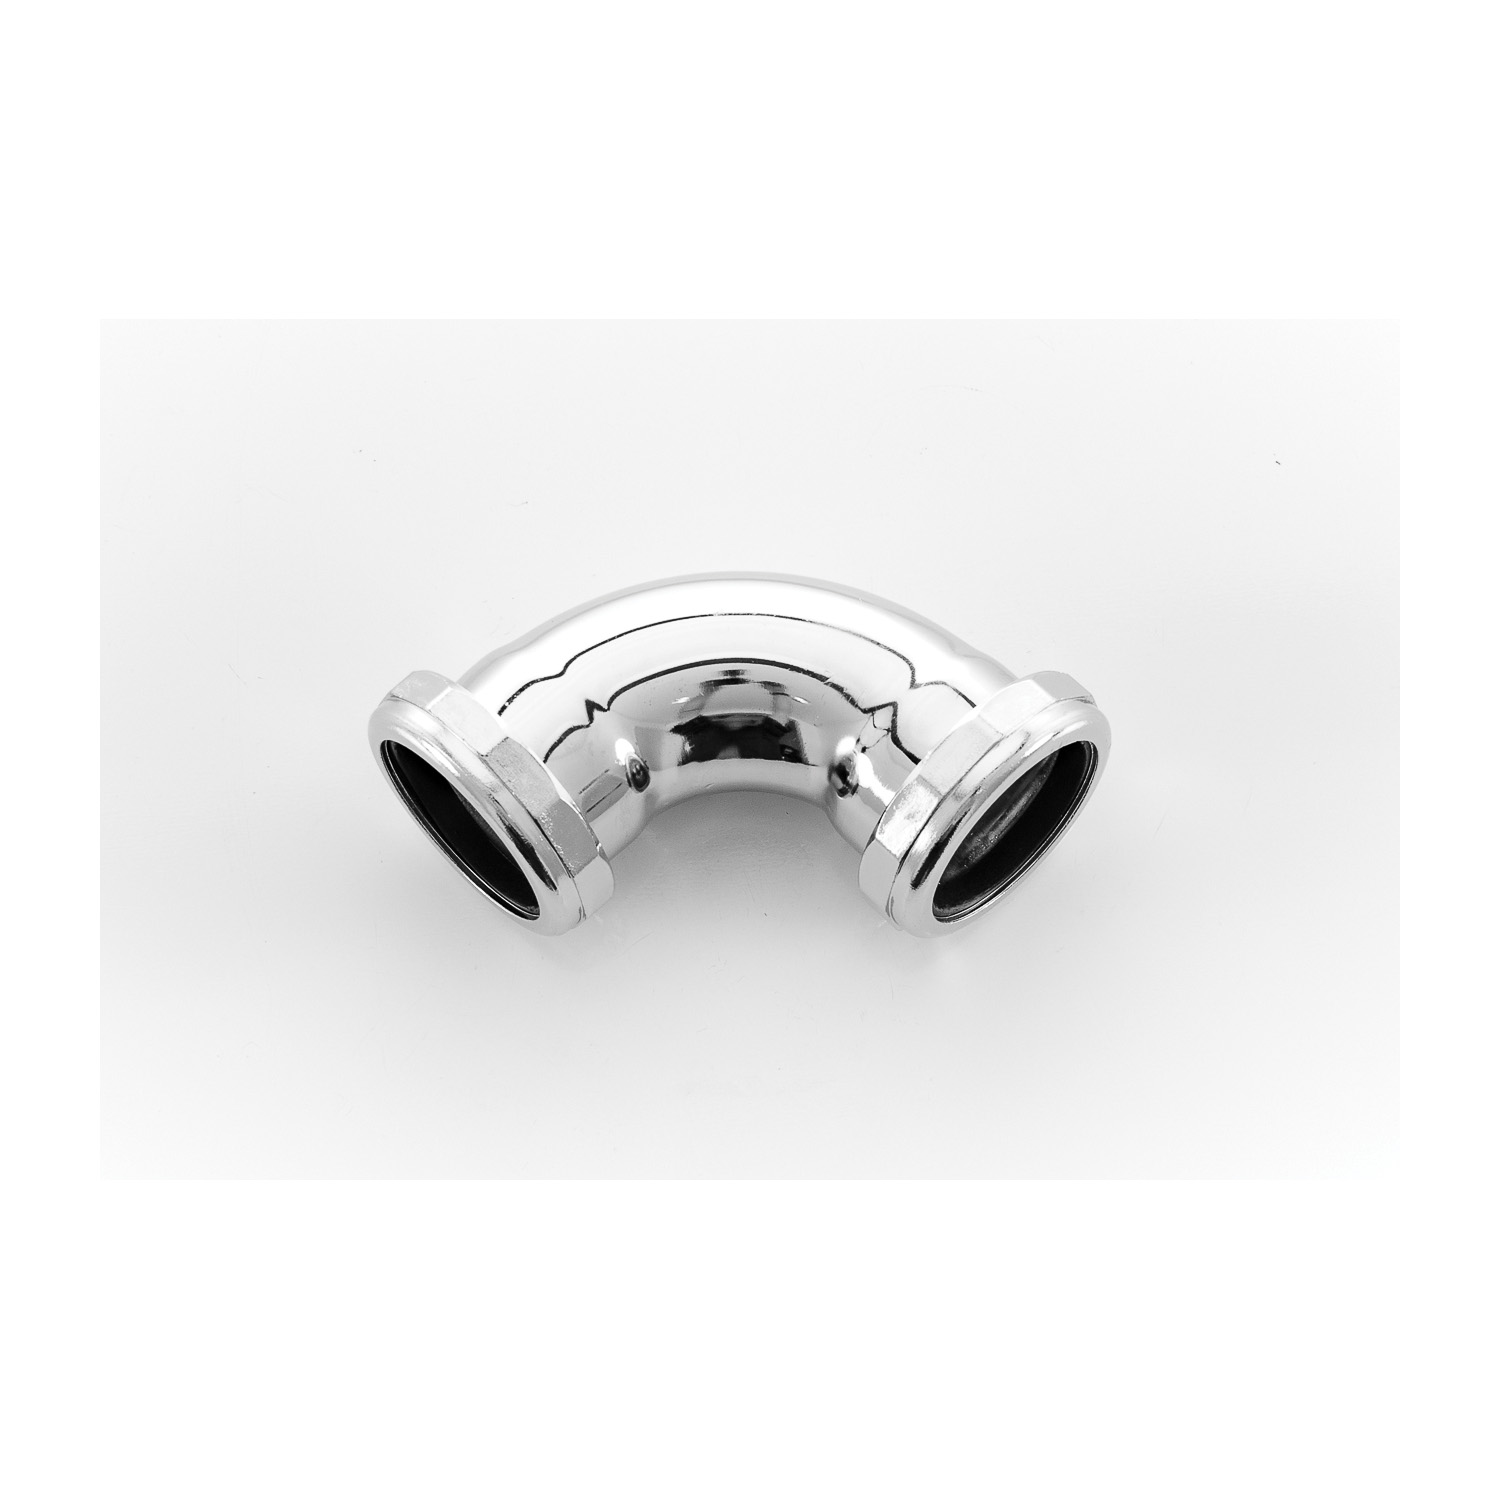 PASCO 34526 Repair Elbow With Chrome Plated Die Cast Nuts, 1-1/2 in Nominal, 90 deg, 20 ga, Polished Chrome